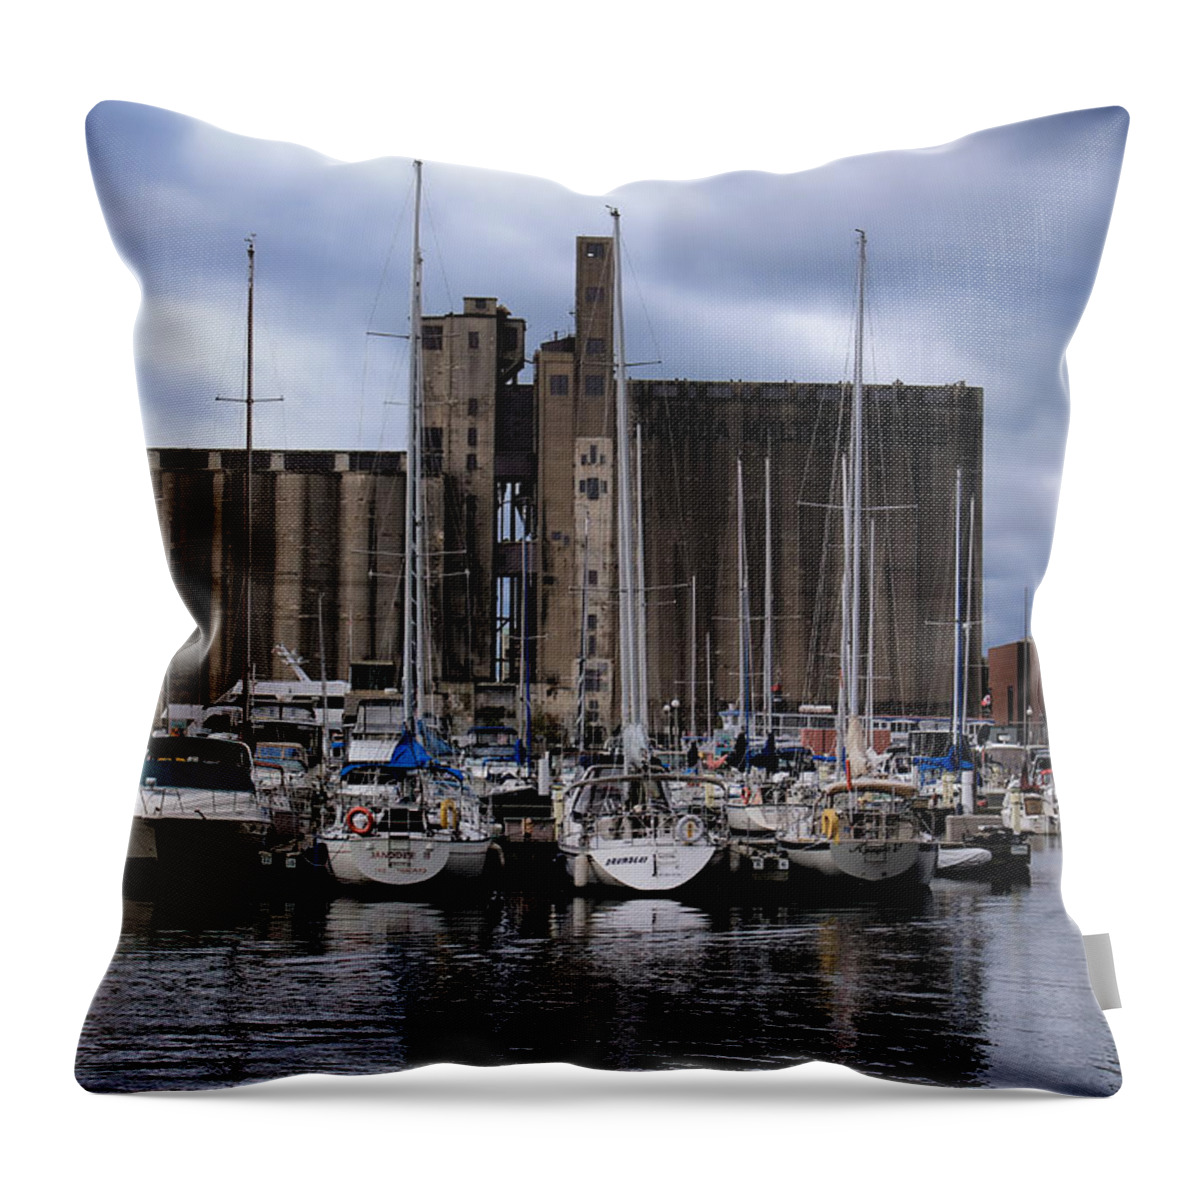 Malting Silo Throw Pillow featuring the photograph Canada Malting Silos Harbourfront by Nicky Jameson